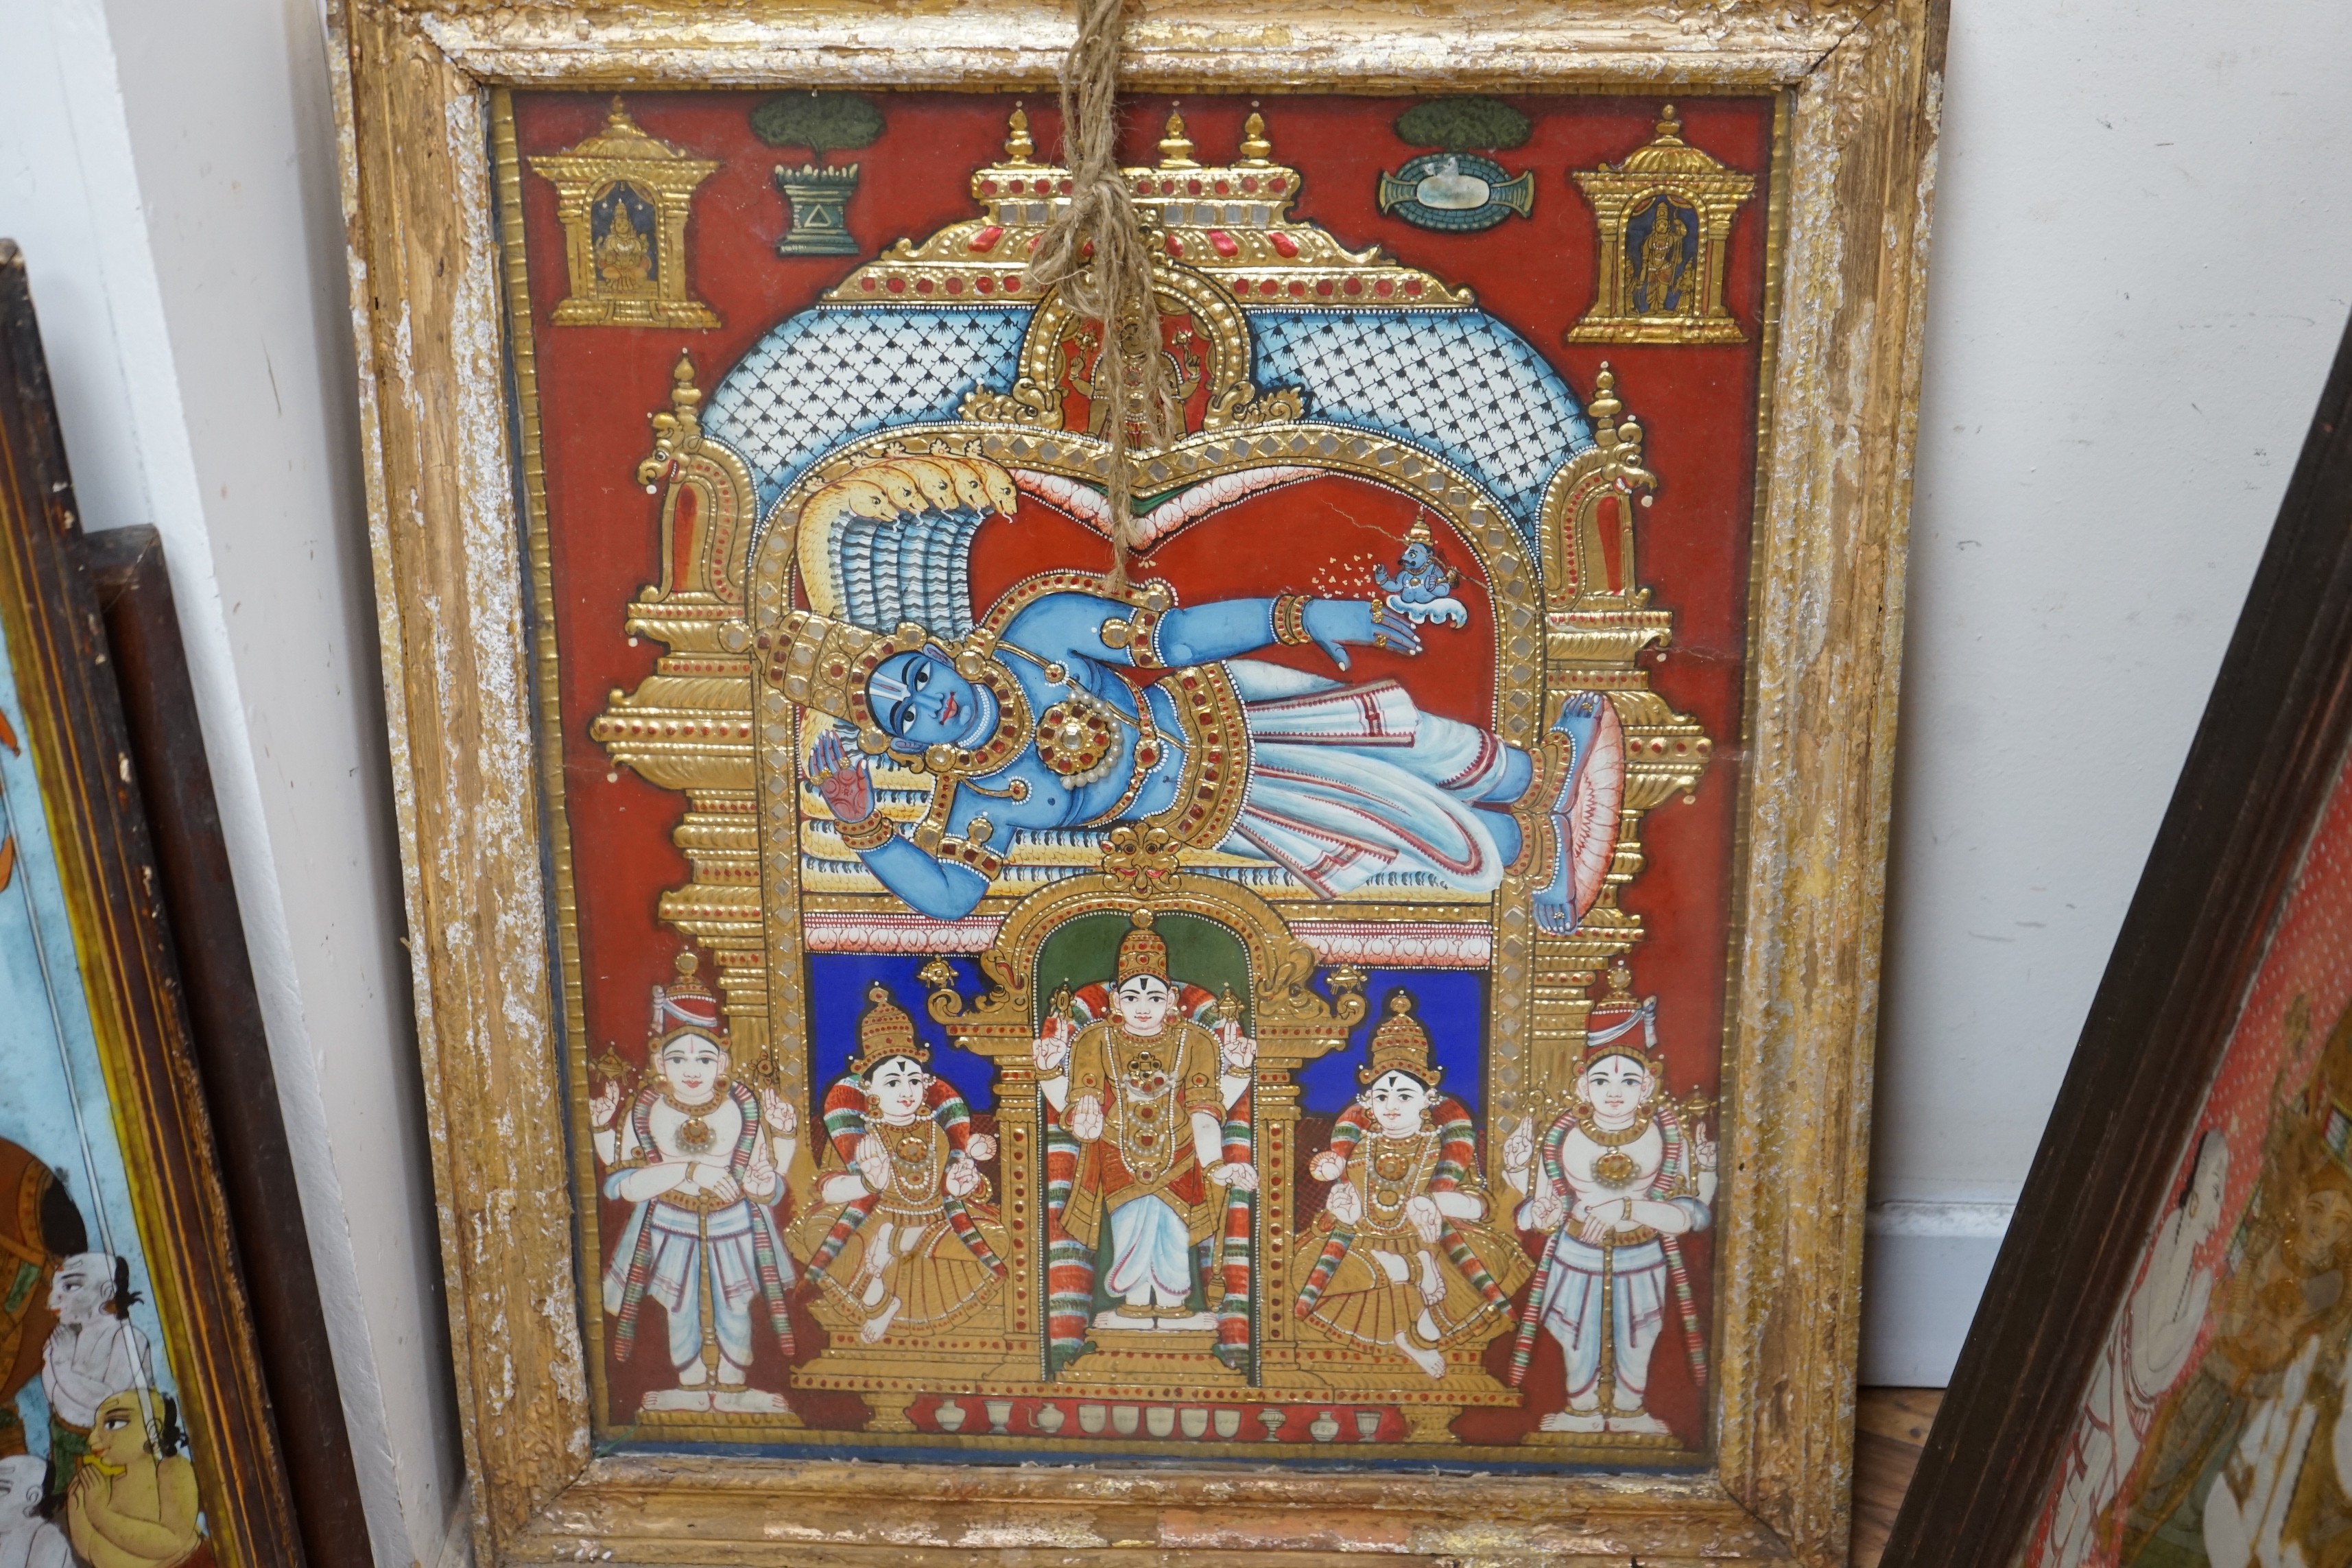 A collection of eight Indian reverse decorated glass pictures, 20th century, largest frame 70cm X 60cm